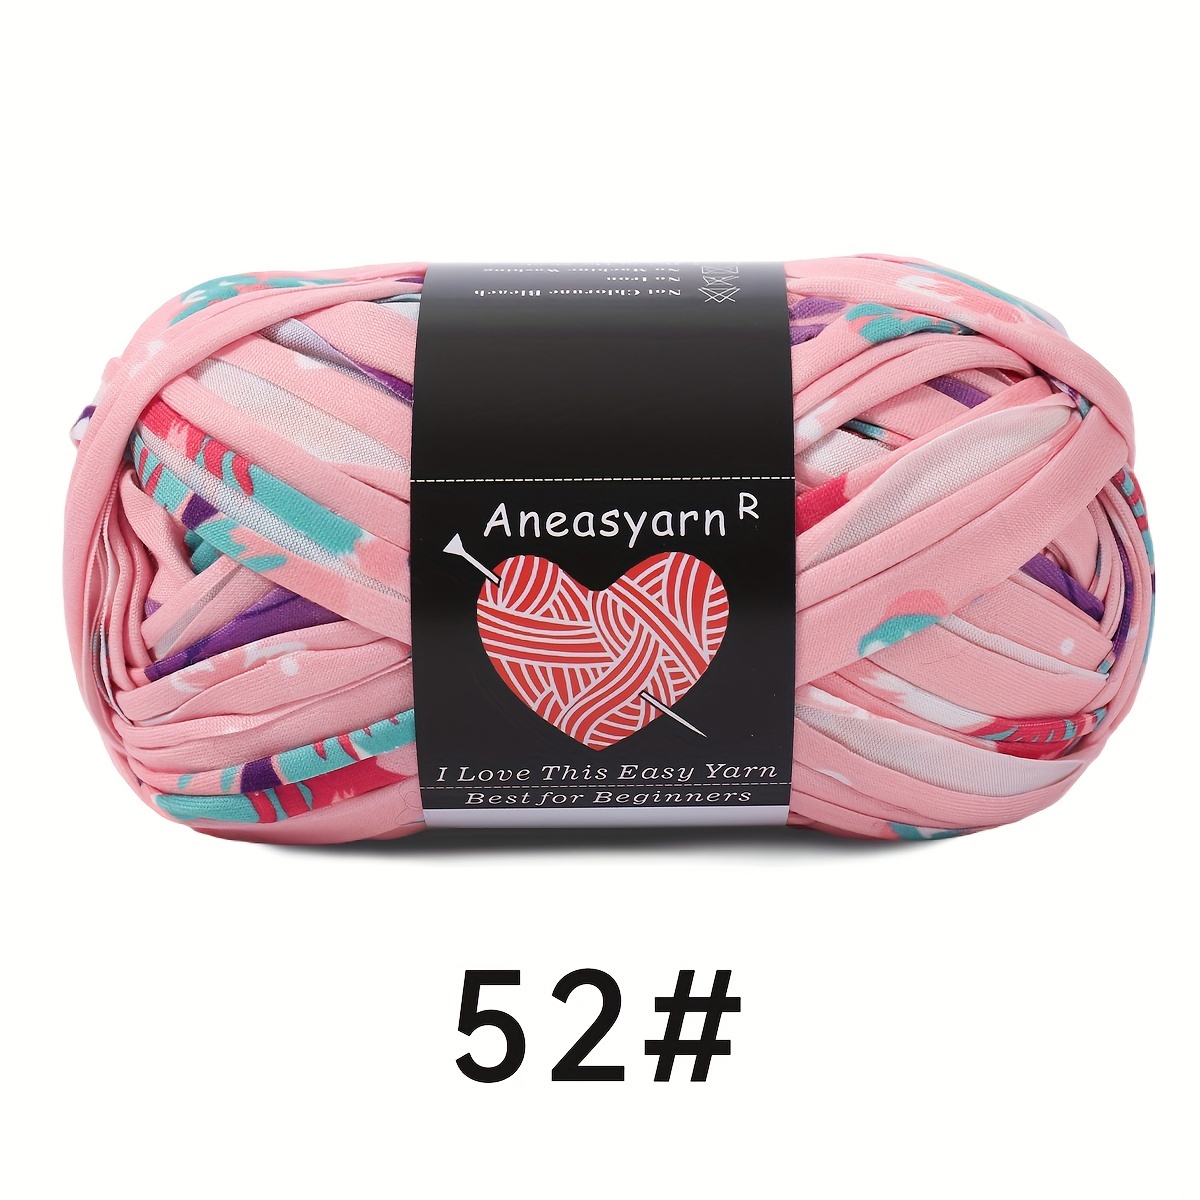 is this yarn good for clothing? : r/crochet